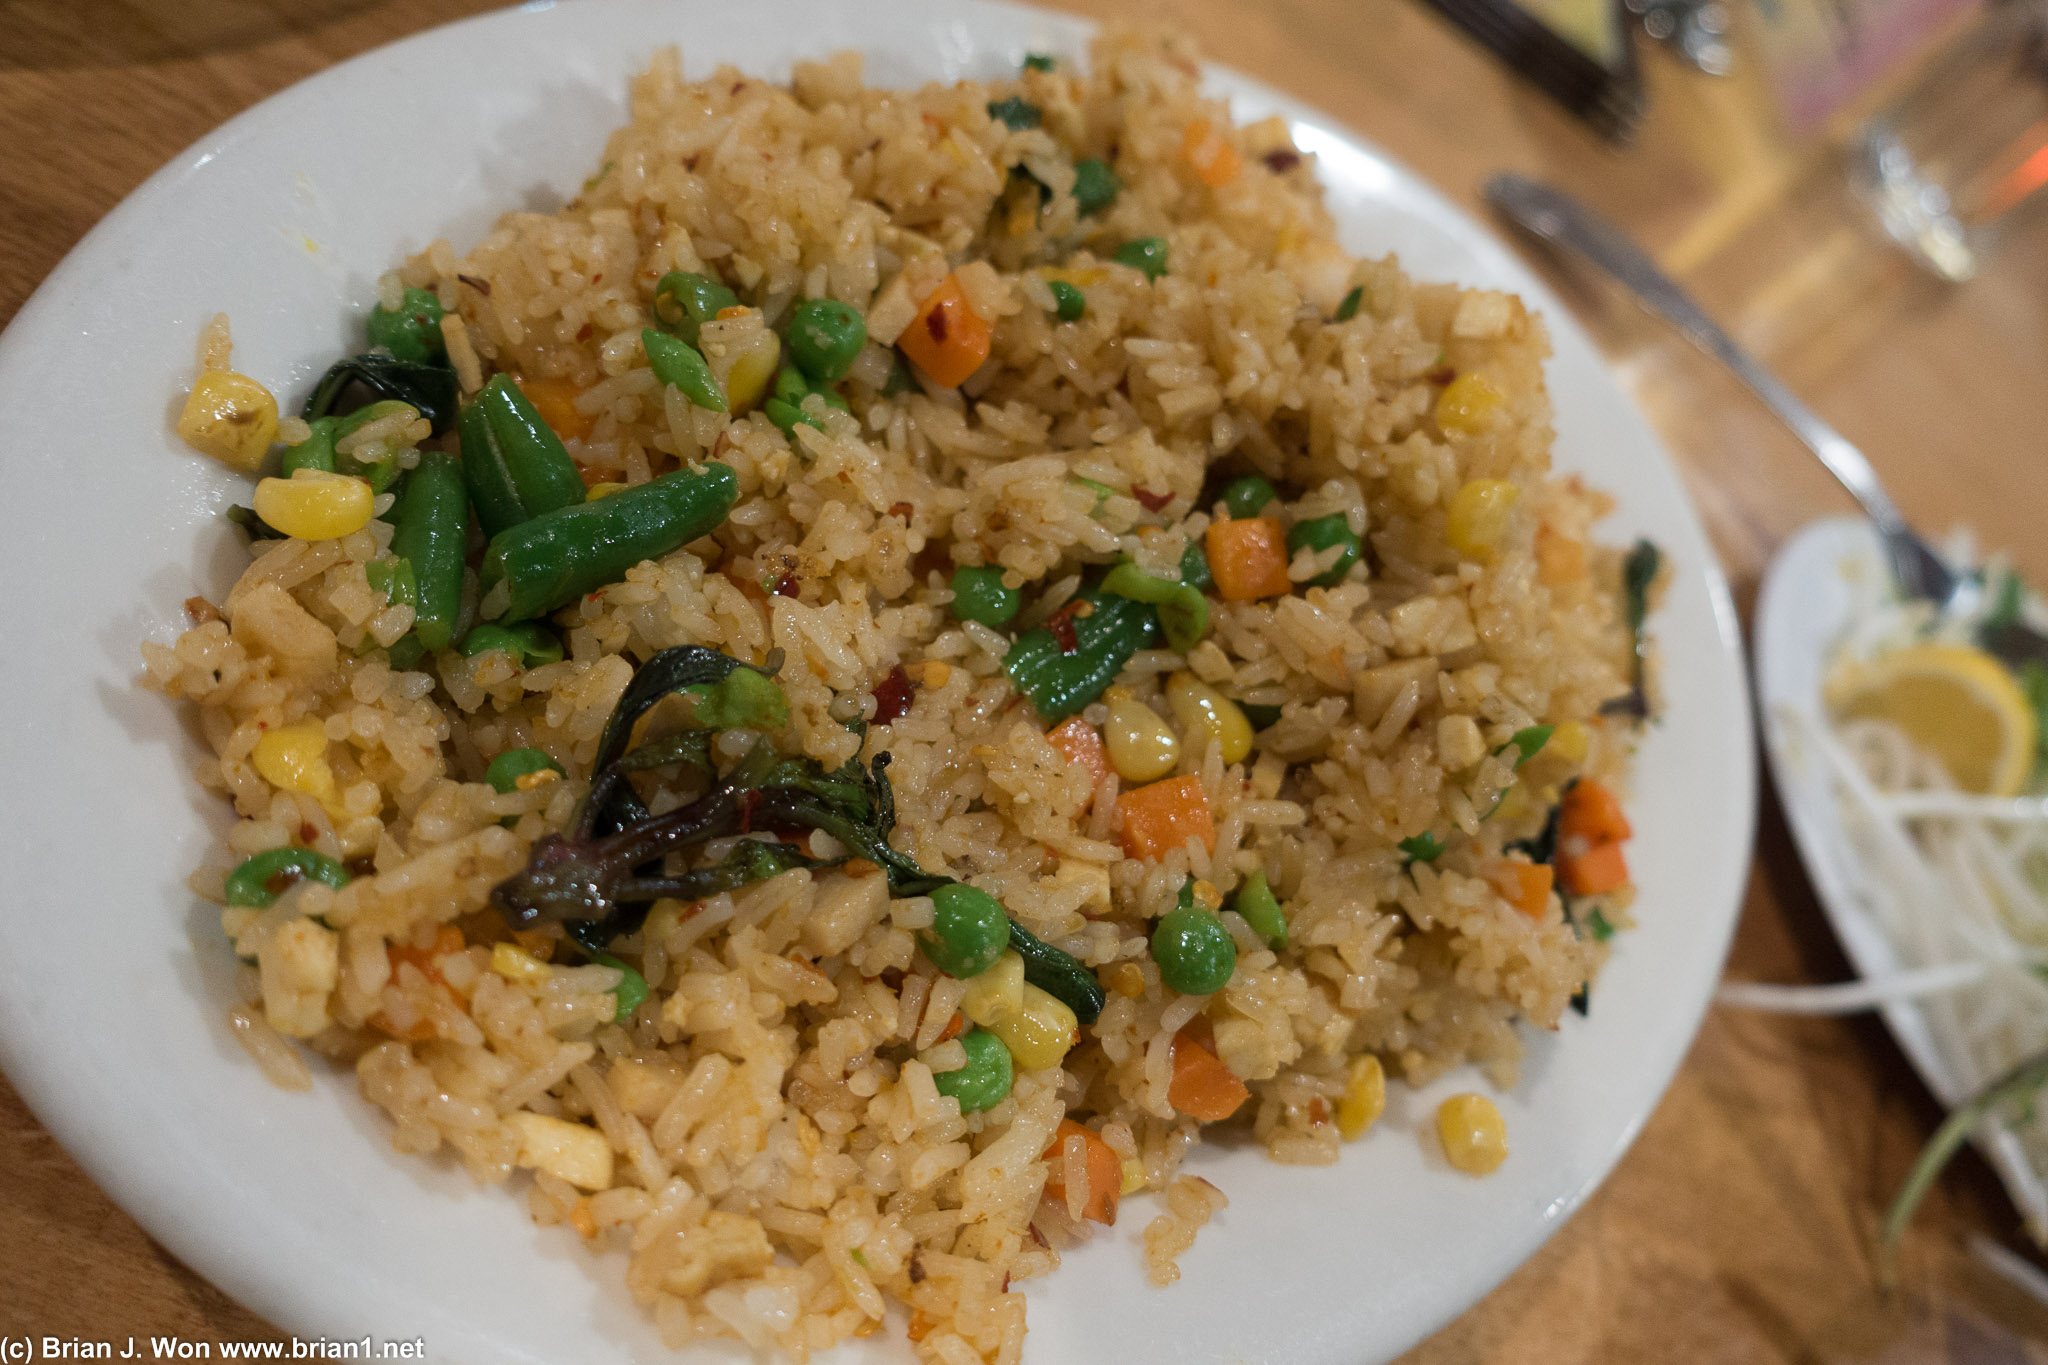 Thai fried rice. Basil and chili make it Thai, or at least that's what the chef thinks?